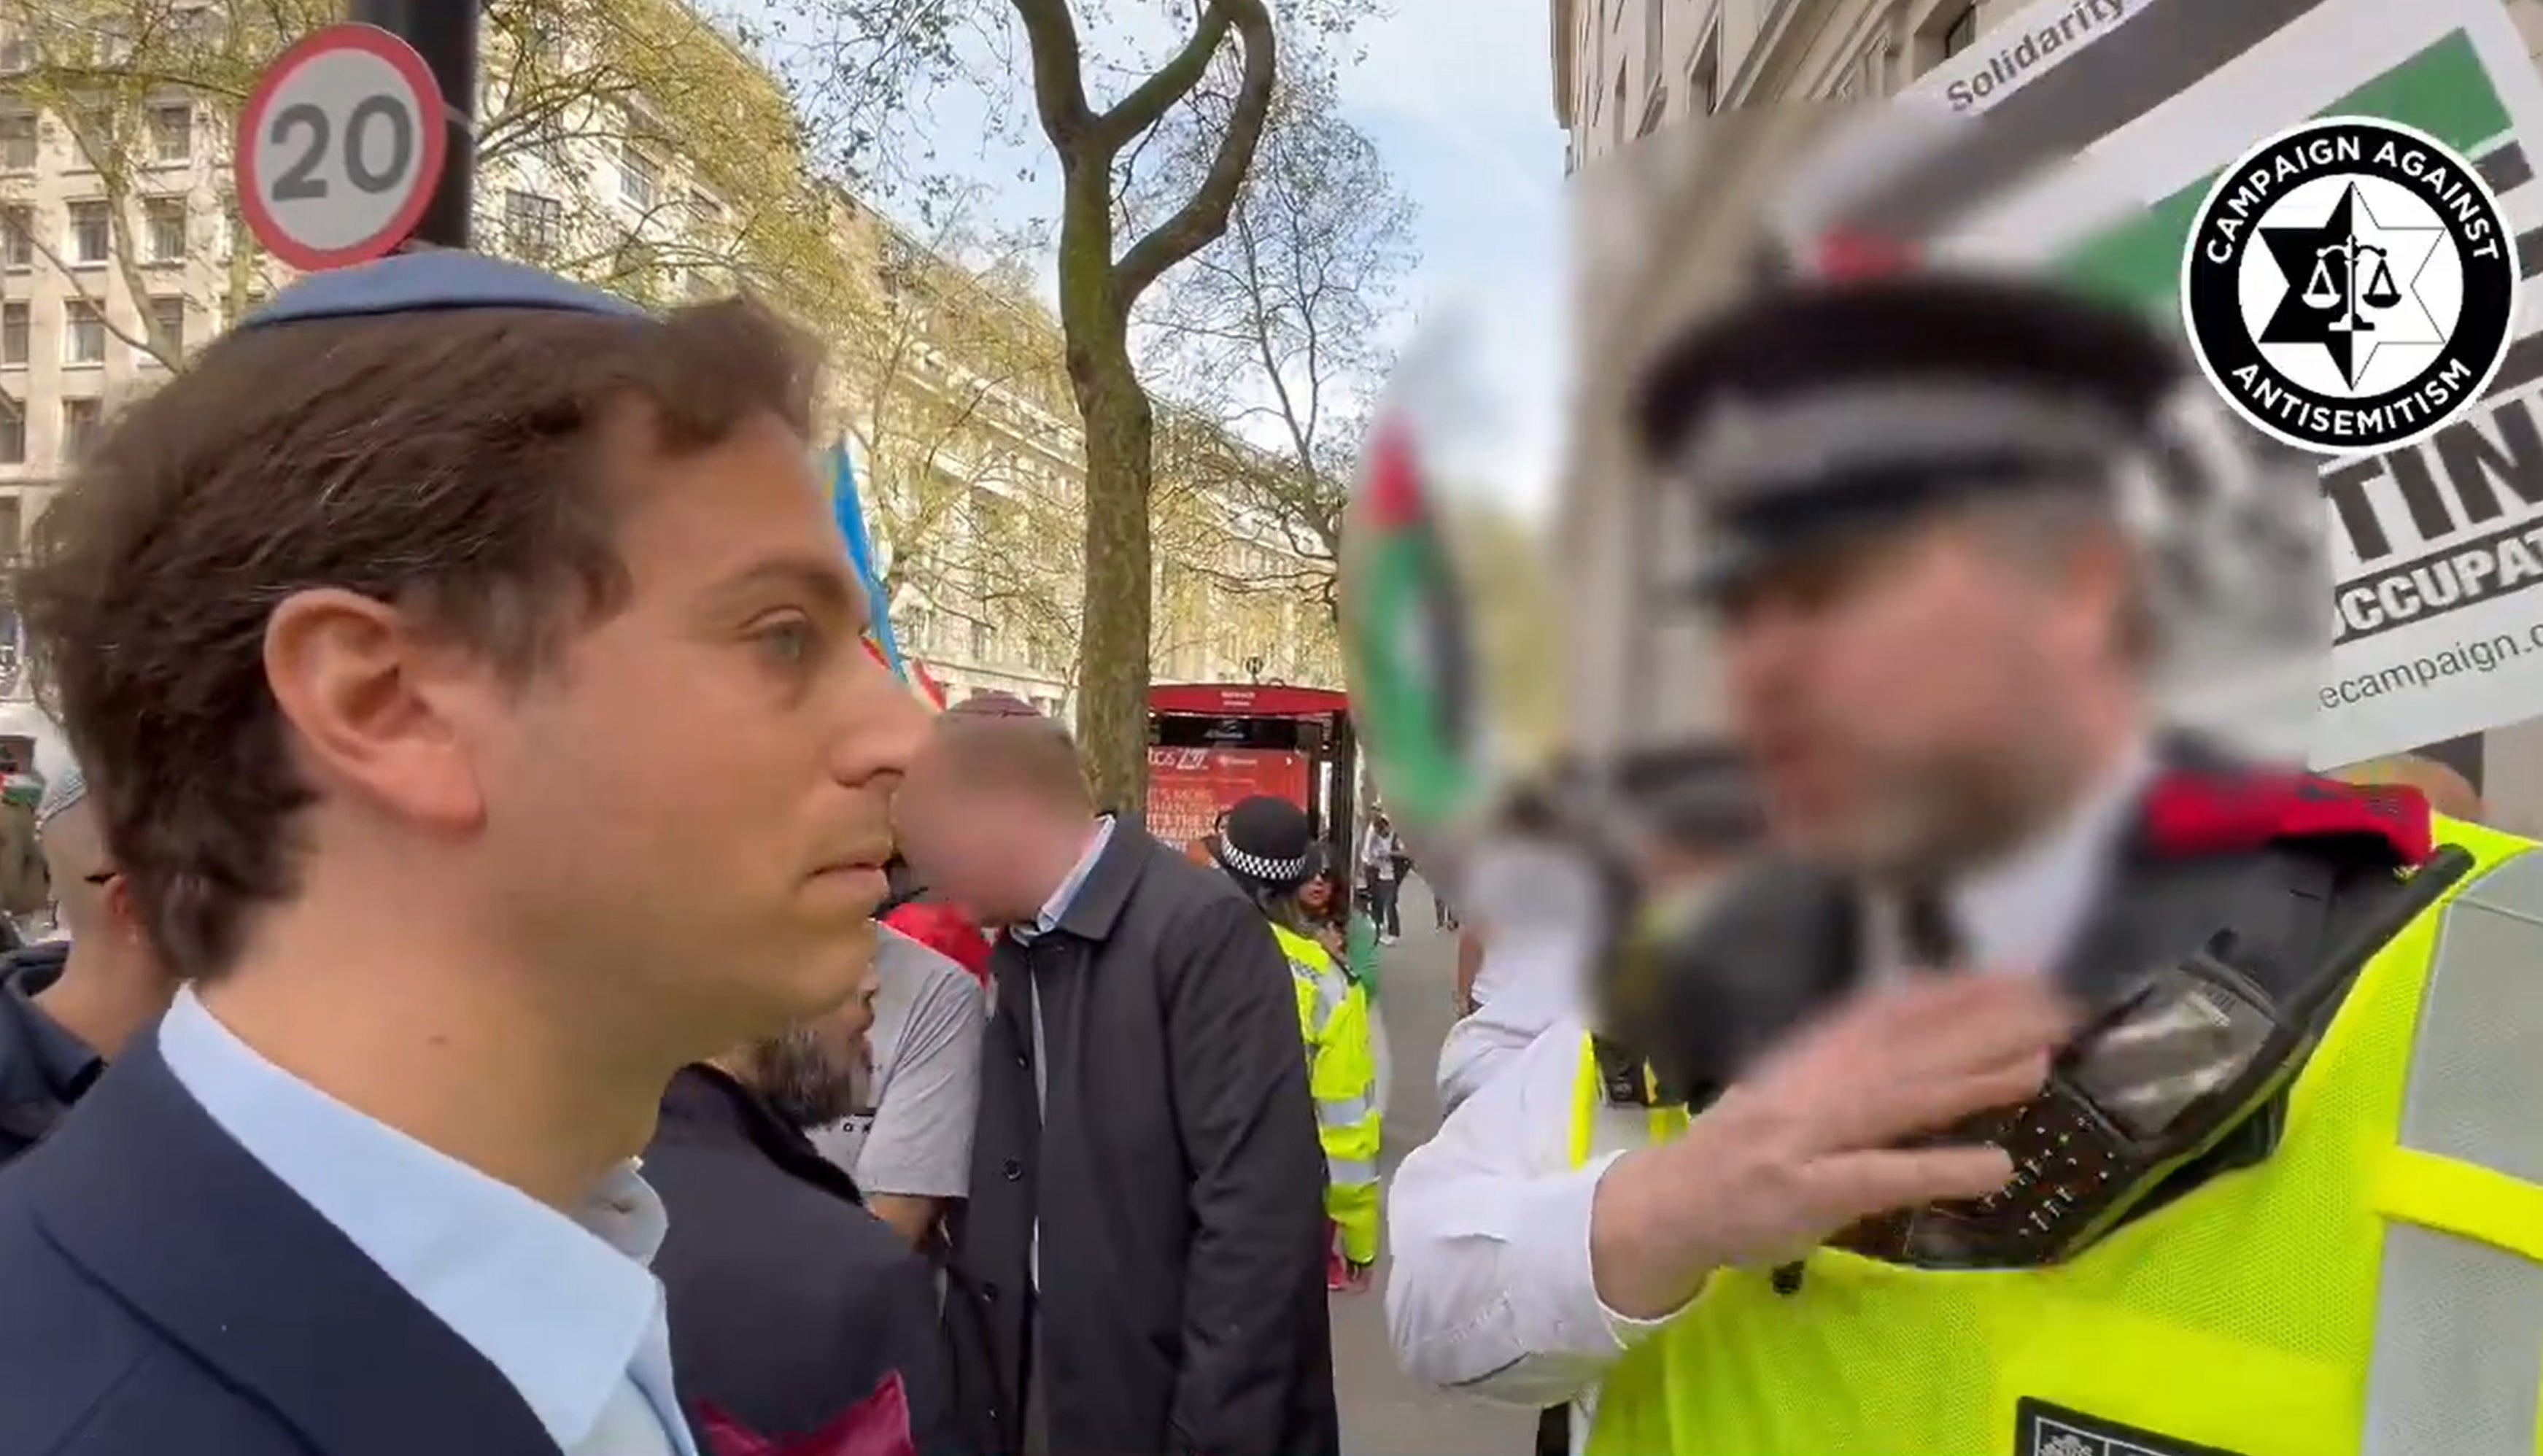 Gideon Falter was wearing a kippah skullcap when he was stopped from crossing the road near the demonstration in Aldwych on Saturday 13 April